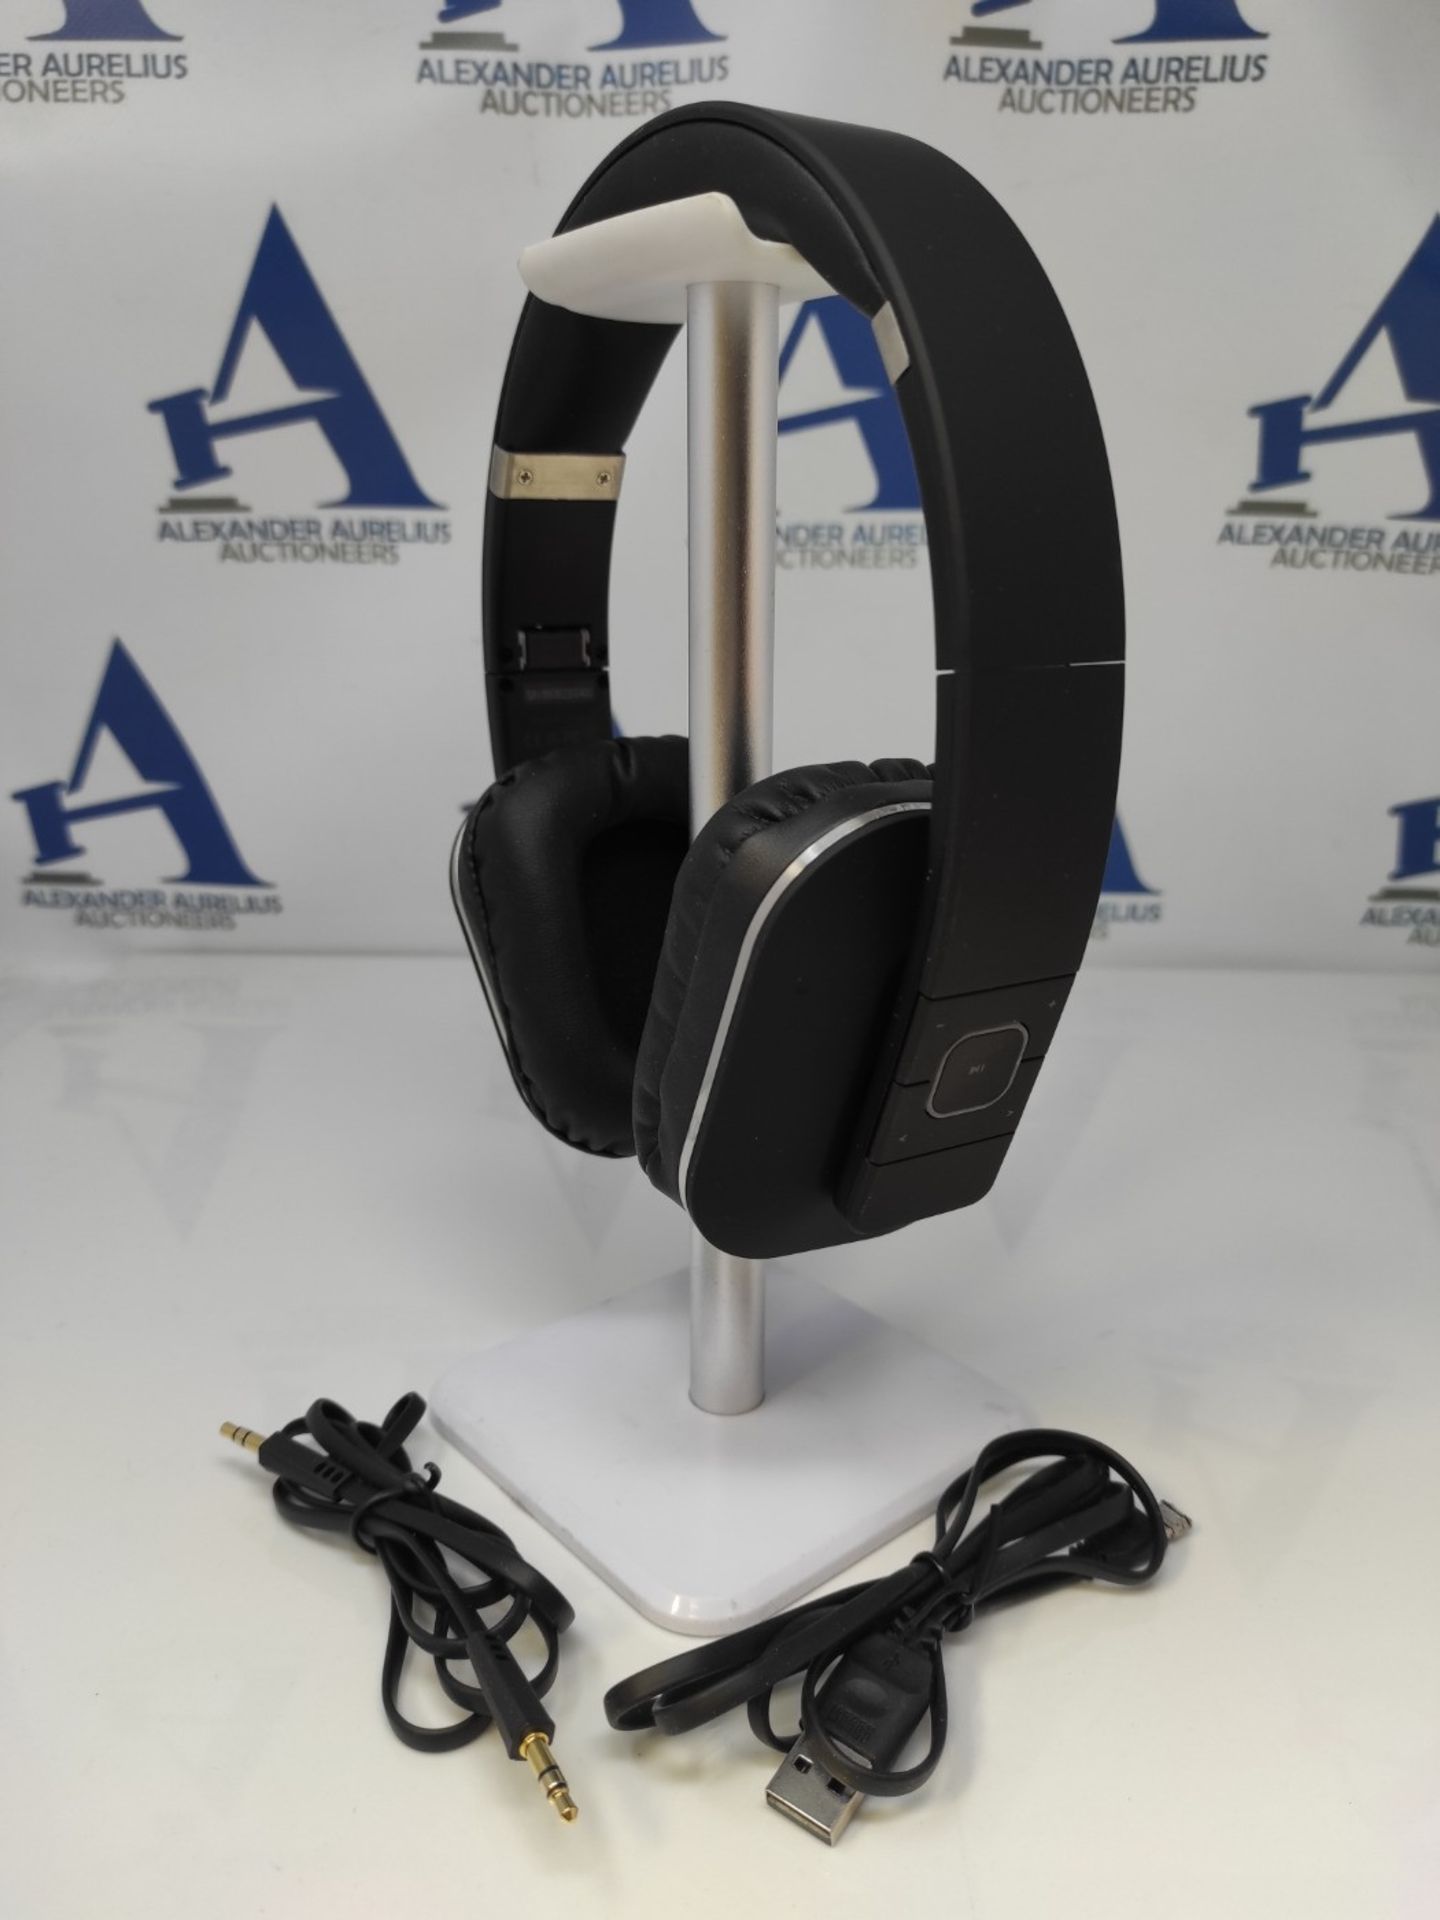 Wireless Bluetooth Headset 4.2 aptX Low Latency - August EP650 - Over Ear, Lightweight - Image 6 of 6